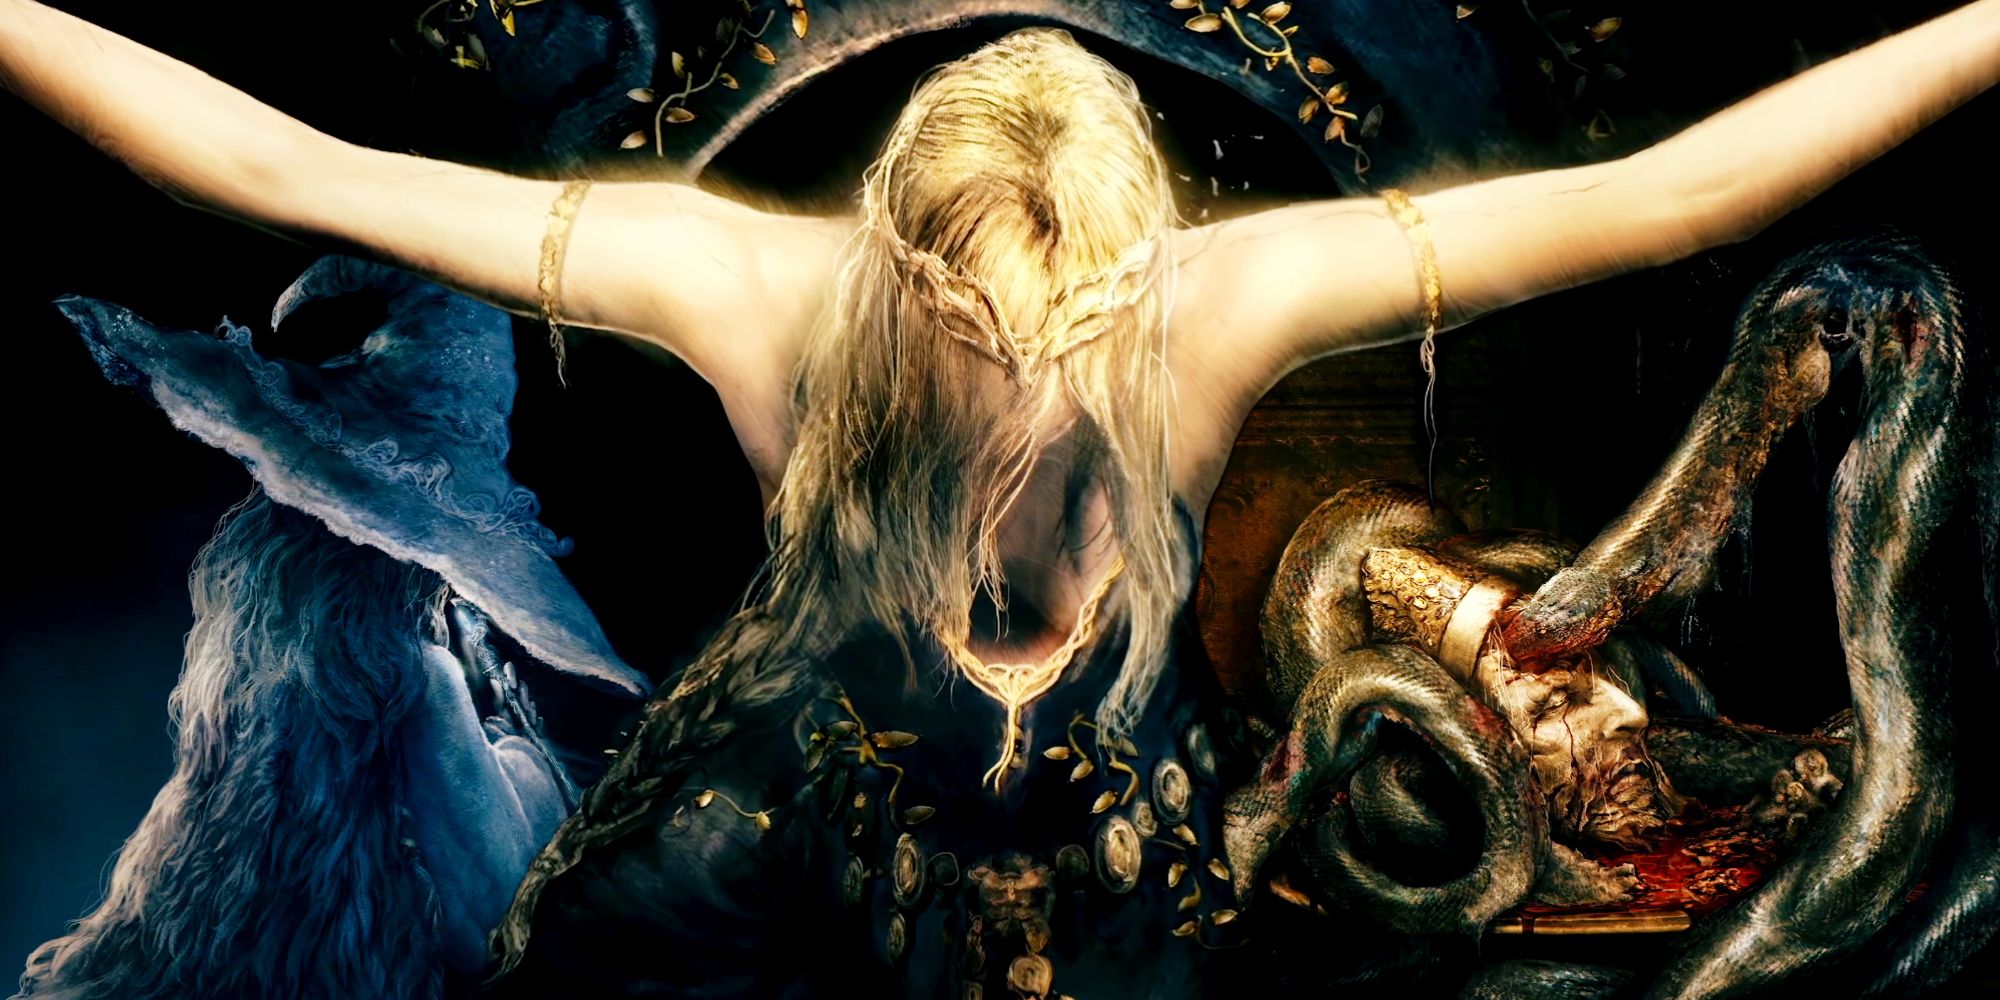 Three scenes from Elden Ring's opening cinematic edited together. Queen Marika is centered, arms outstretched and blonde hair covering her face. On the left is Ranni, her head concealed by a large hat. On the right is Rykard being eaten by the God-Devouring Serpent.